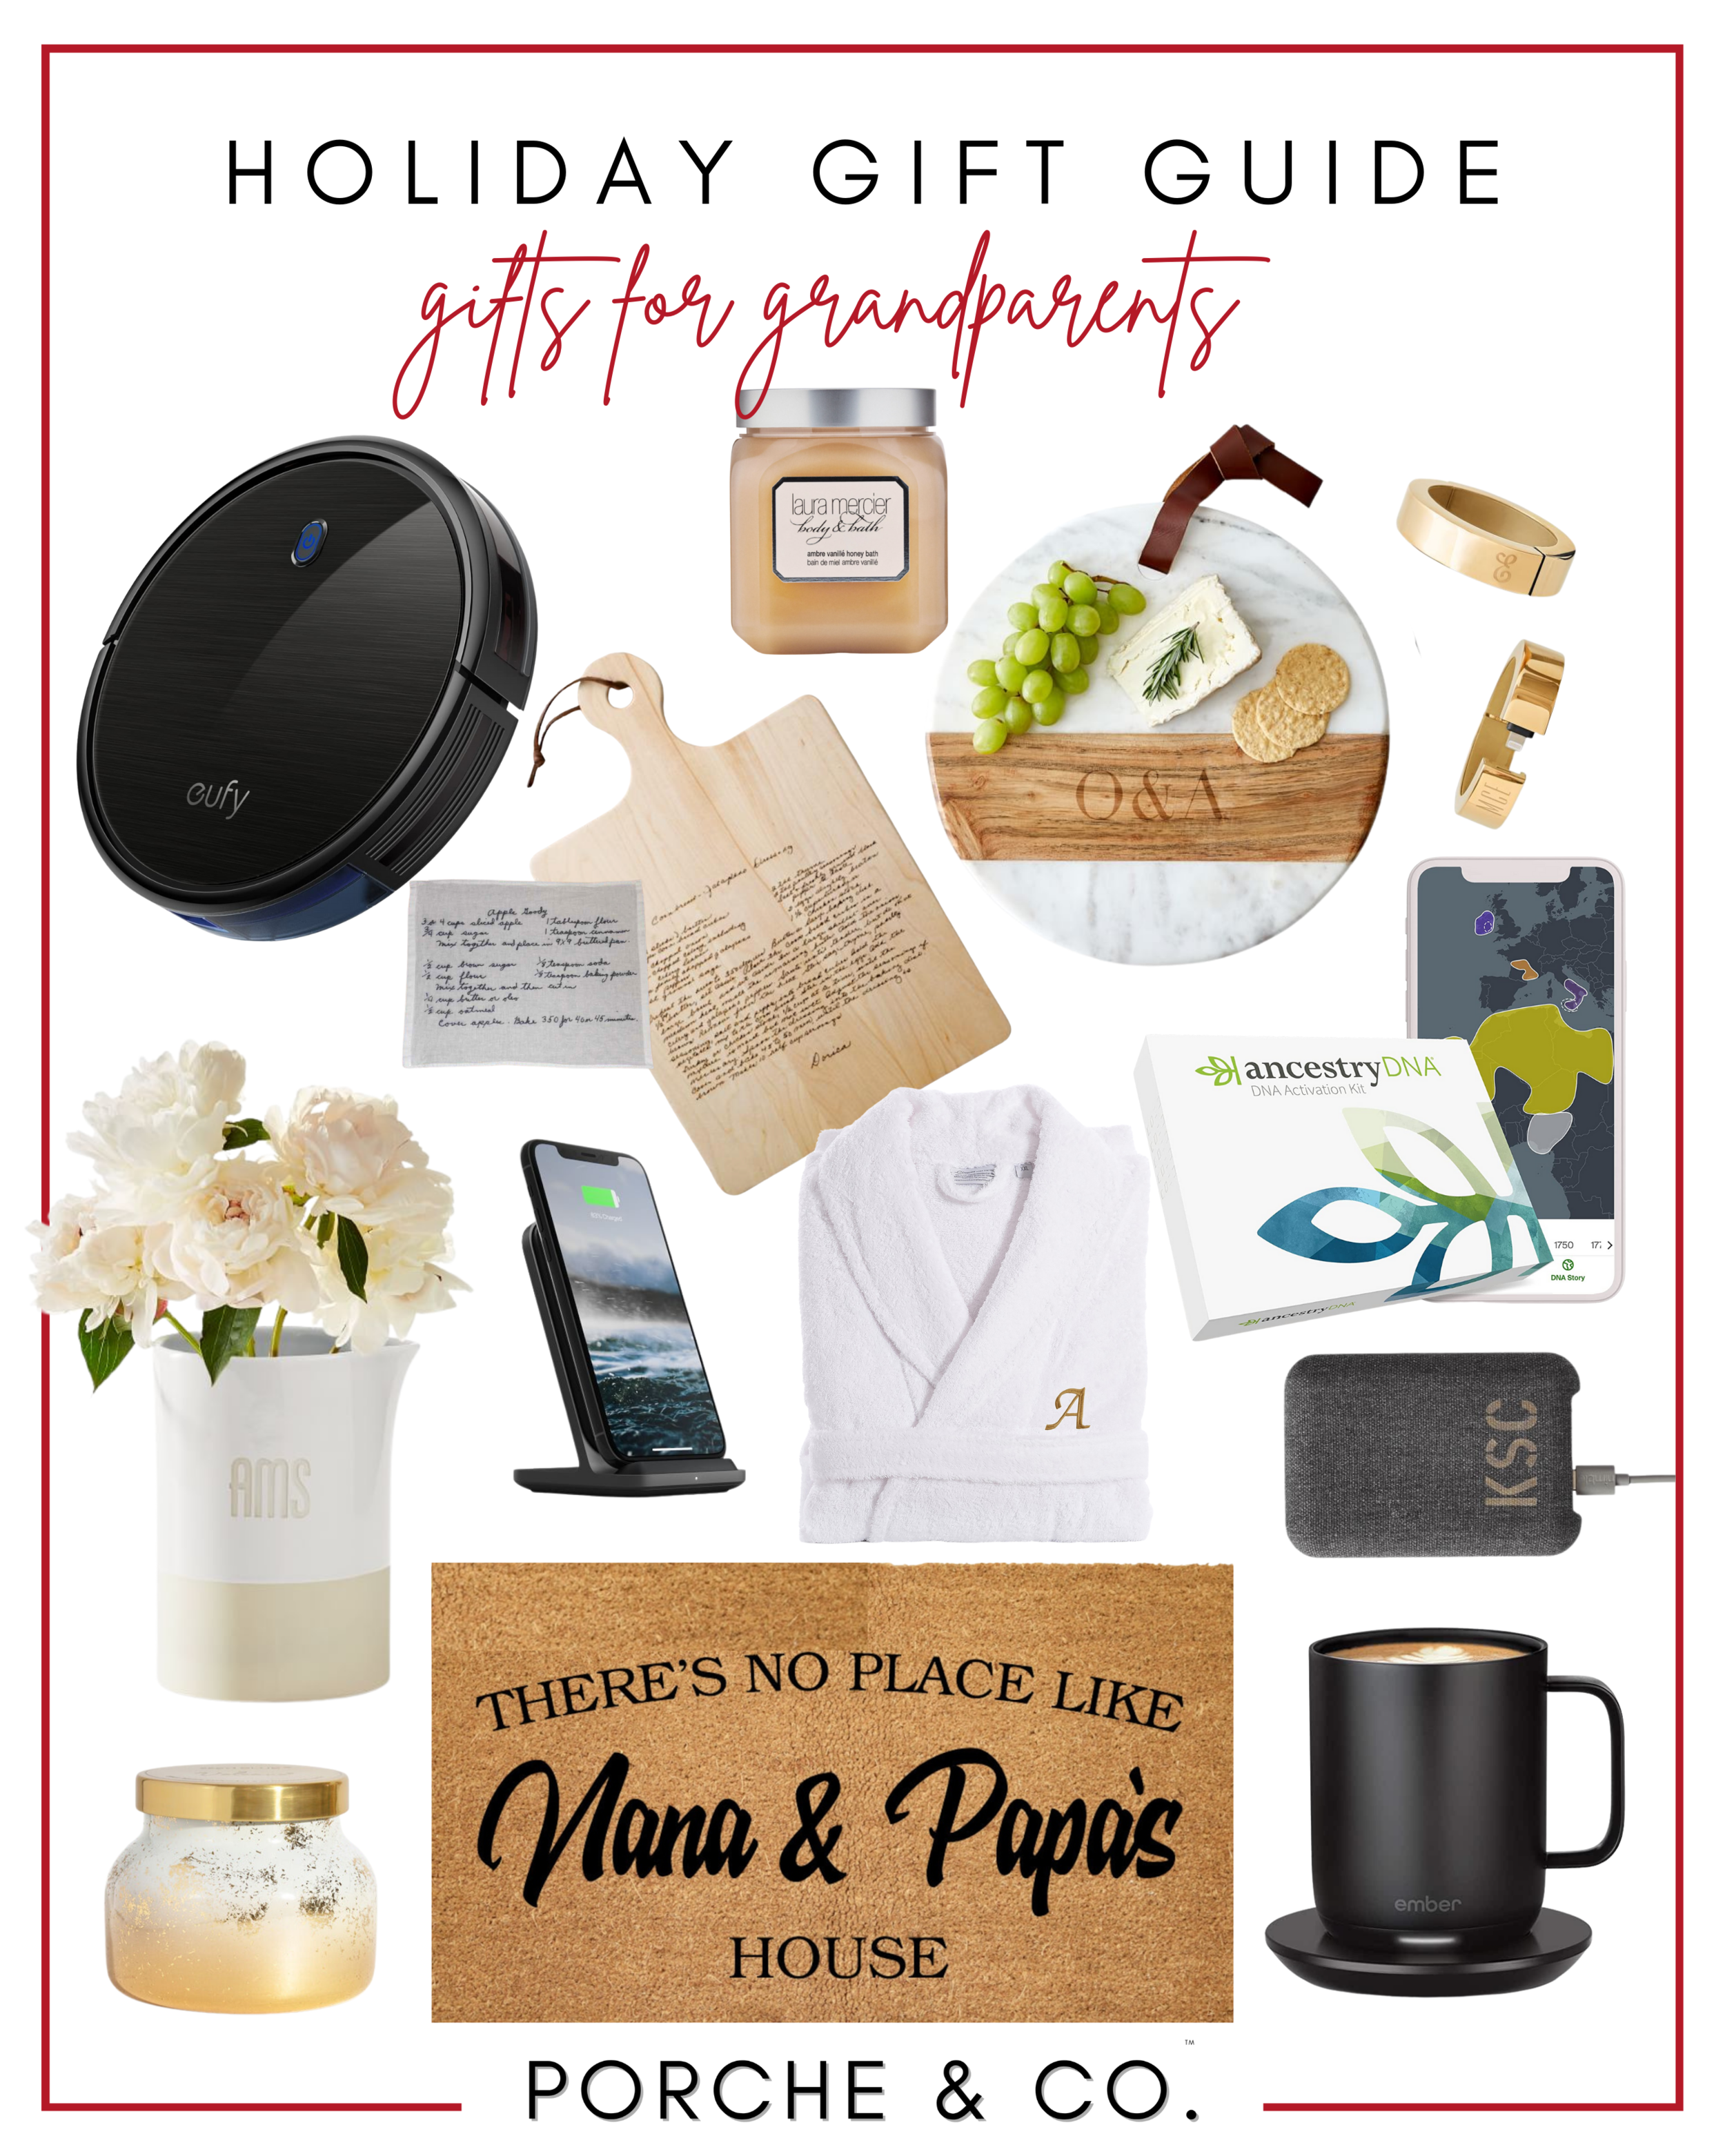 gifts for grandparents (Copy) (Copy) (Copy)